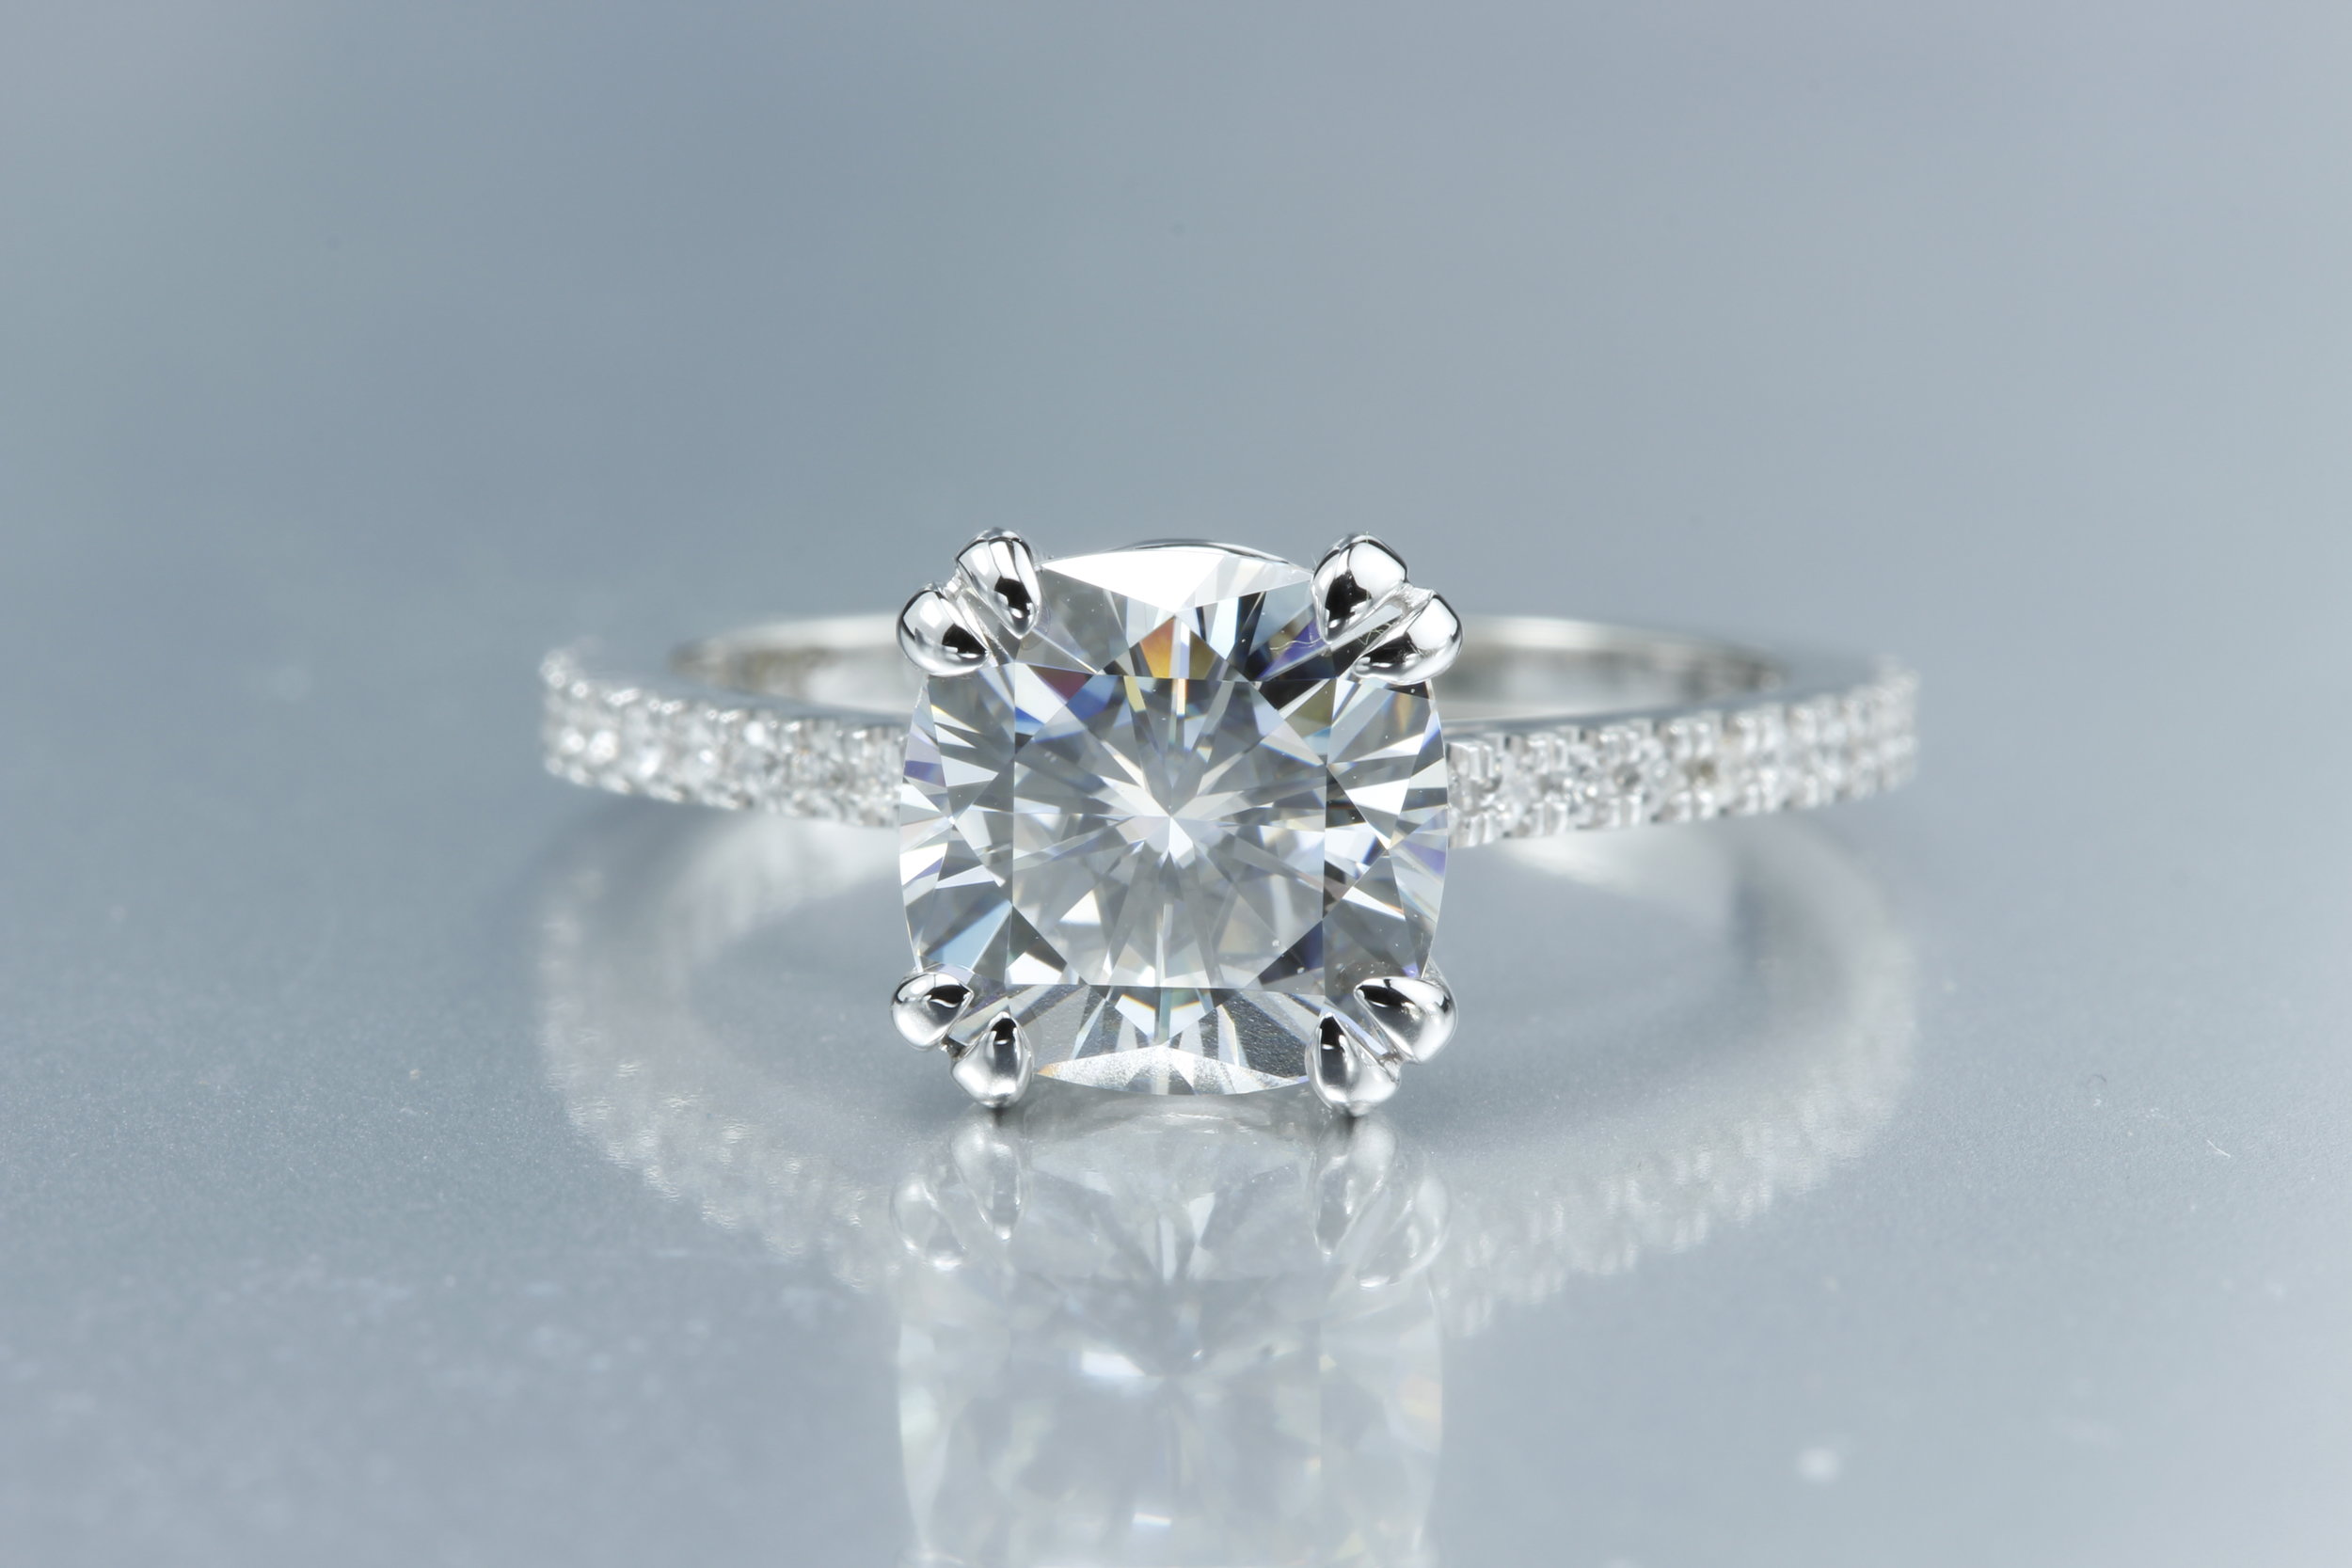 Details about   3.53 Ct Great Cushion Near White Moissanite Diamond Enagement .925 Silver Ring 